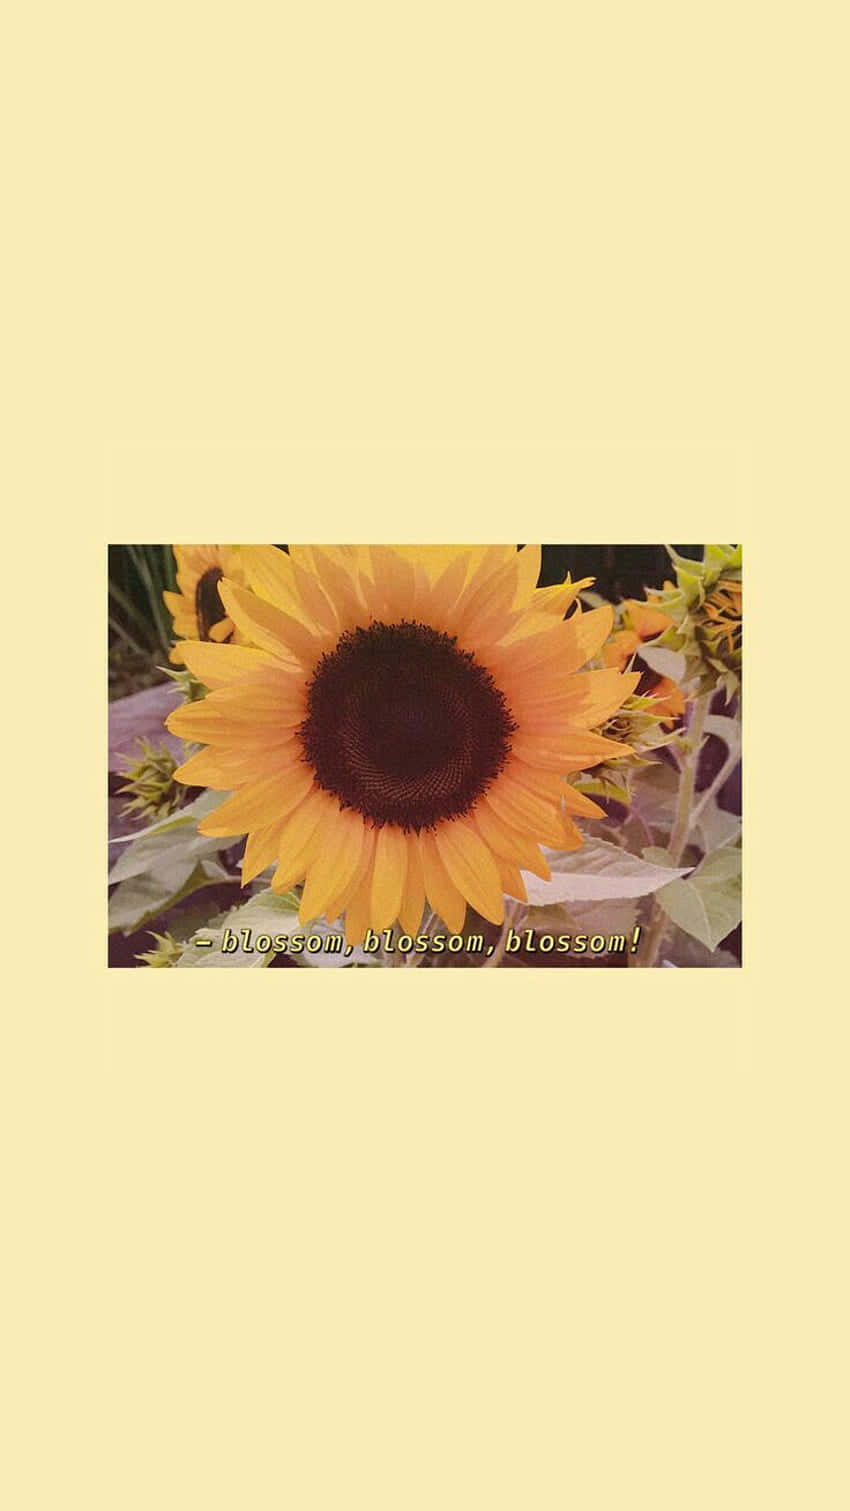 A Sunflower With The Words 'sunflowers Are The Best' Wallpaper